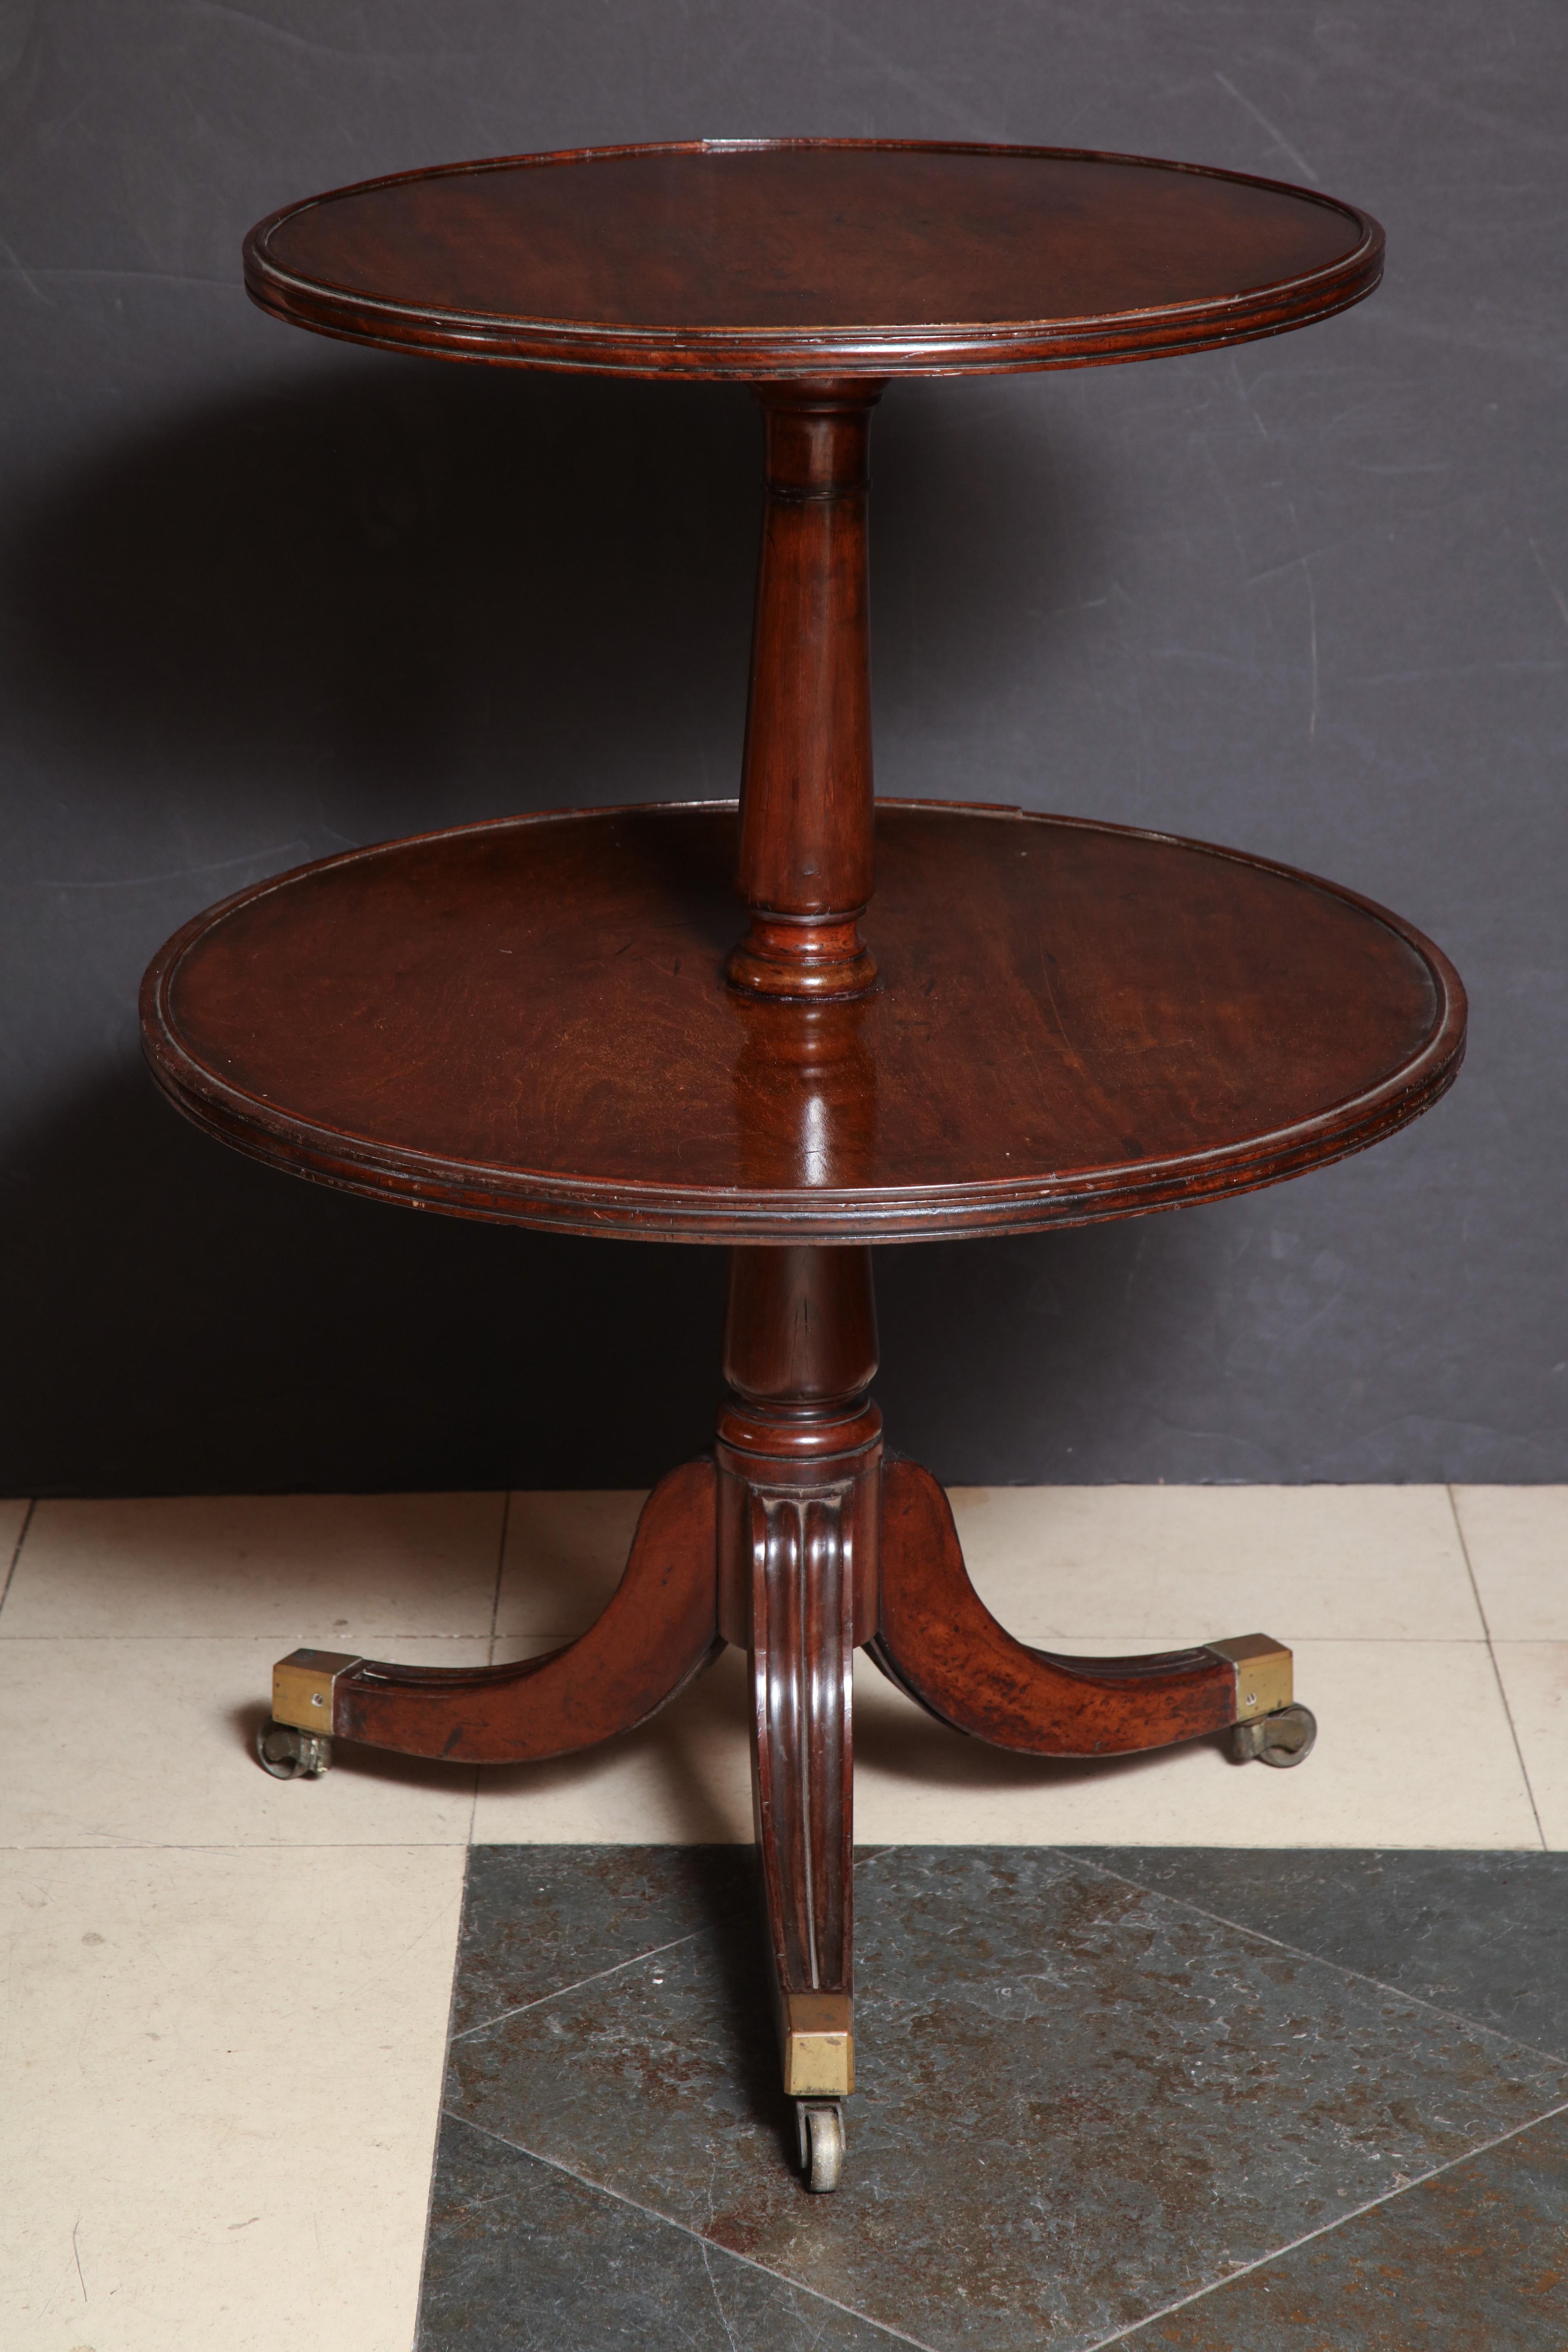 English Regency mahogany two-tier dumbwaier with a turned pedestal on sabre legs with brass casters.
 